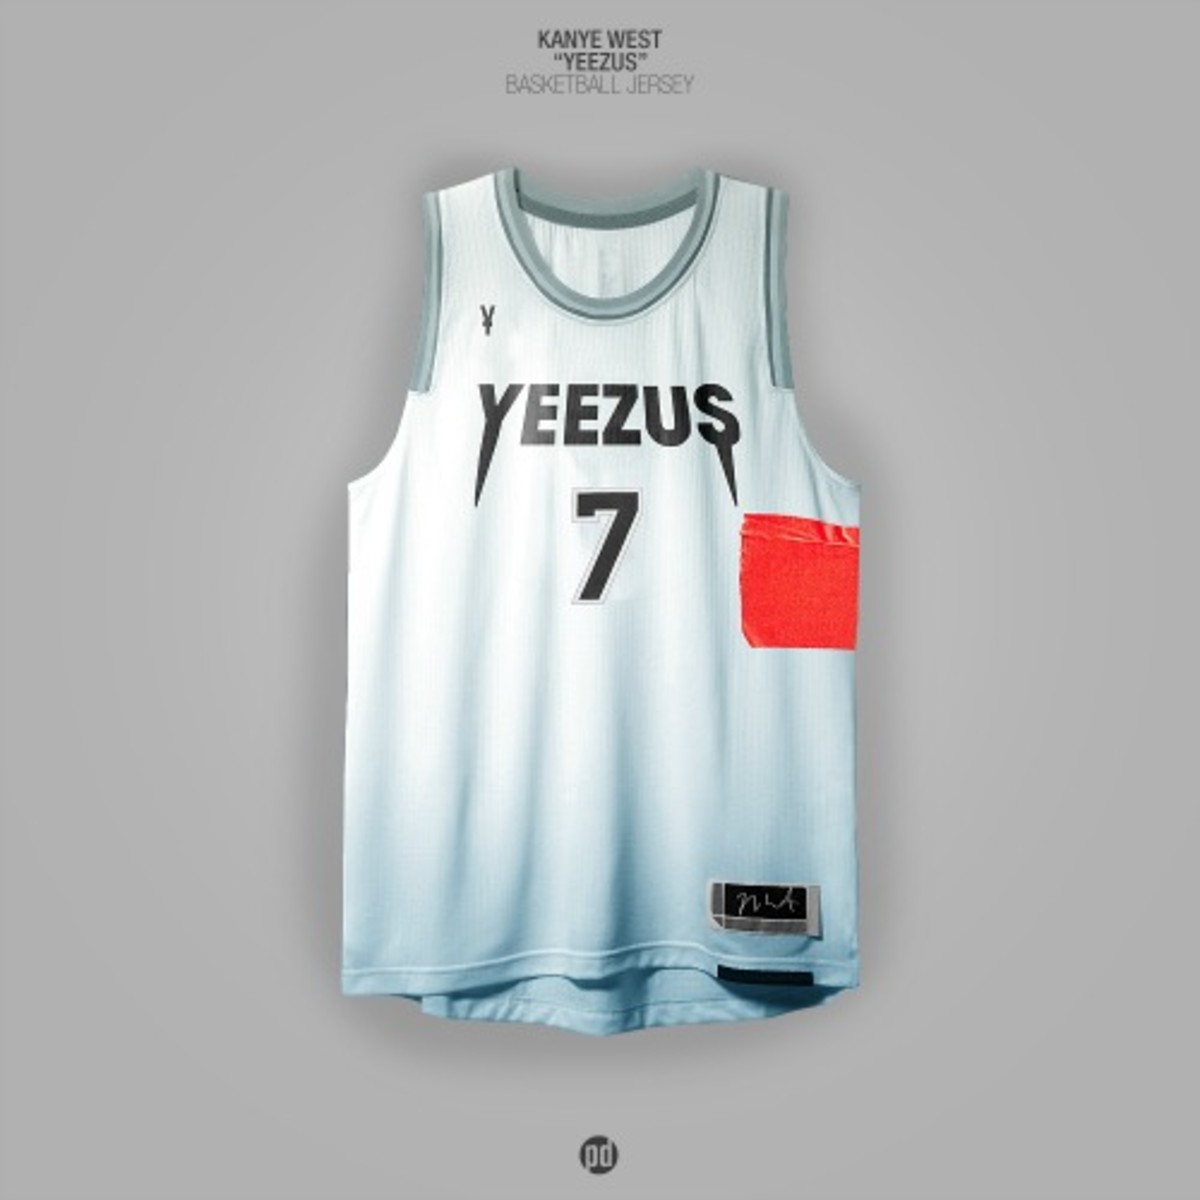 These NBA Jersey Designs Inspired By The Hip-Hop Artists And Cities They  Represent Are Dope AF - BroBible